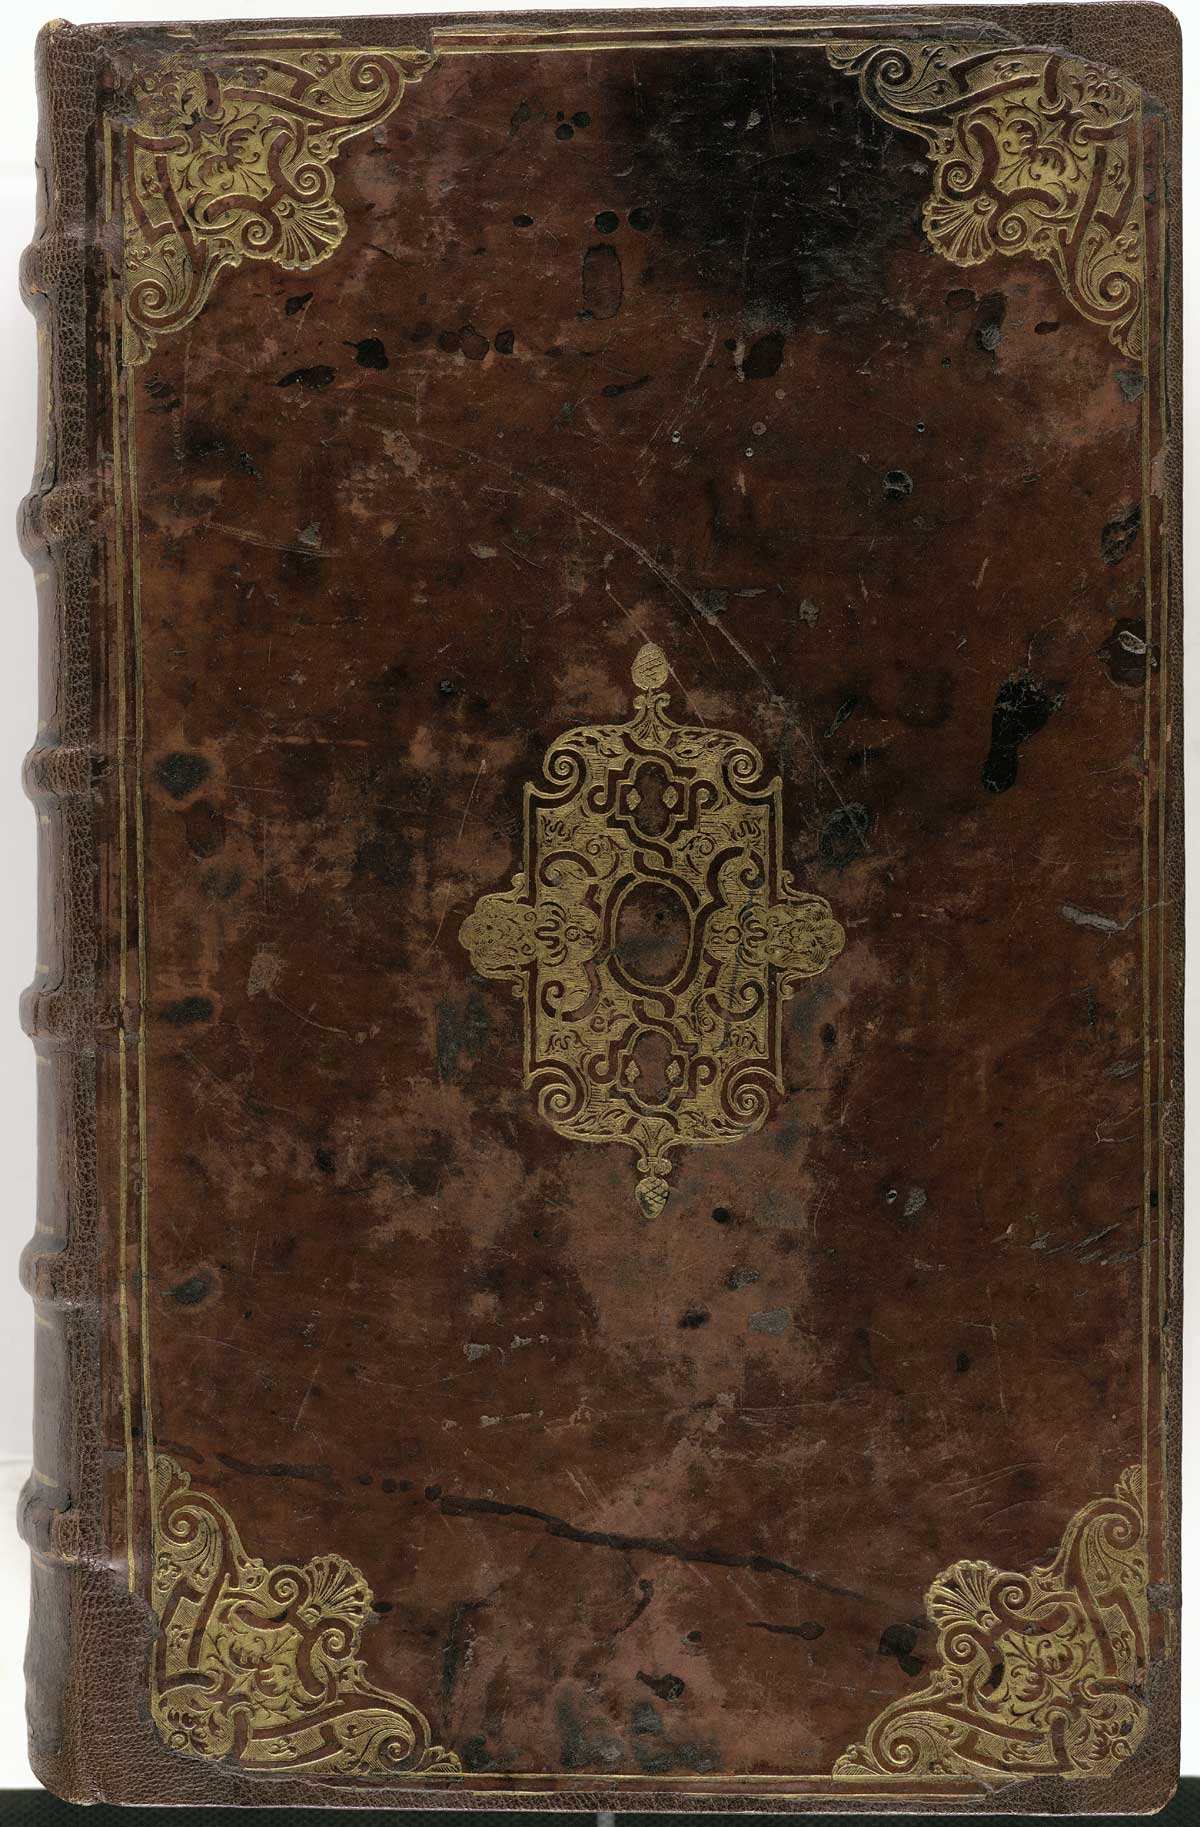 Cover of the 1582 first Latin edition of Ambroise Paré’s Oeuvres